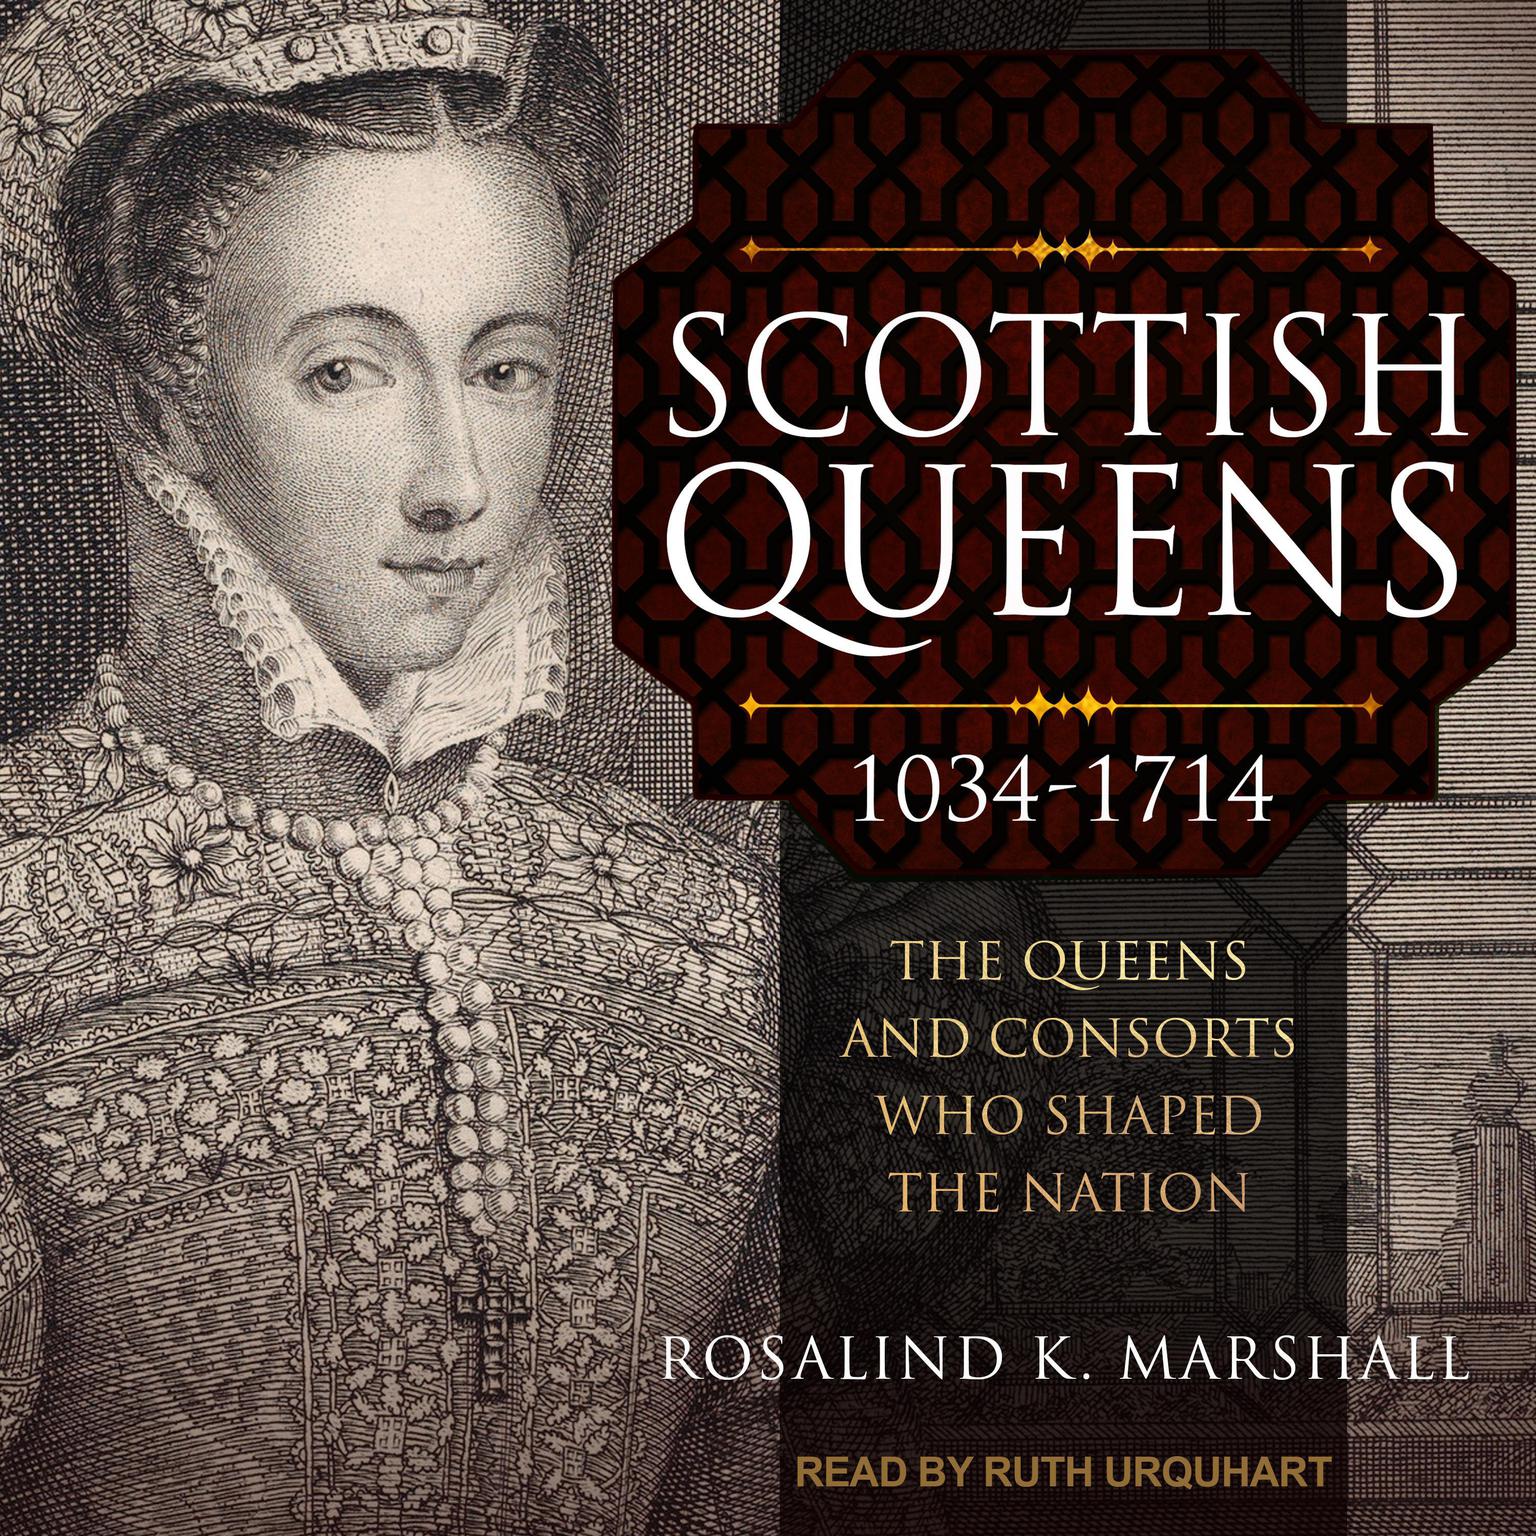 Scottish Queens, 1034-1714: The Queens and Consorts Who Shaped the Nation Audiobook, by Rosalind K. Marshall